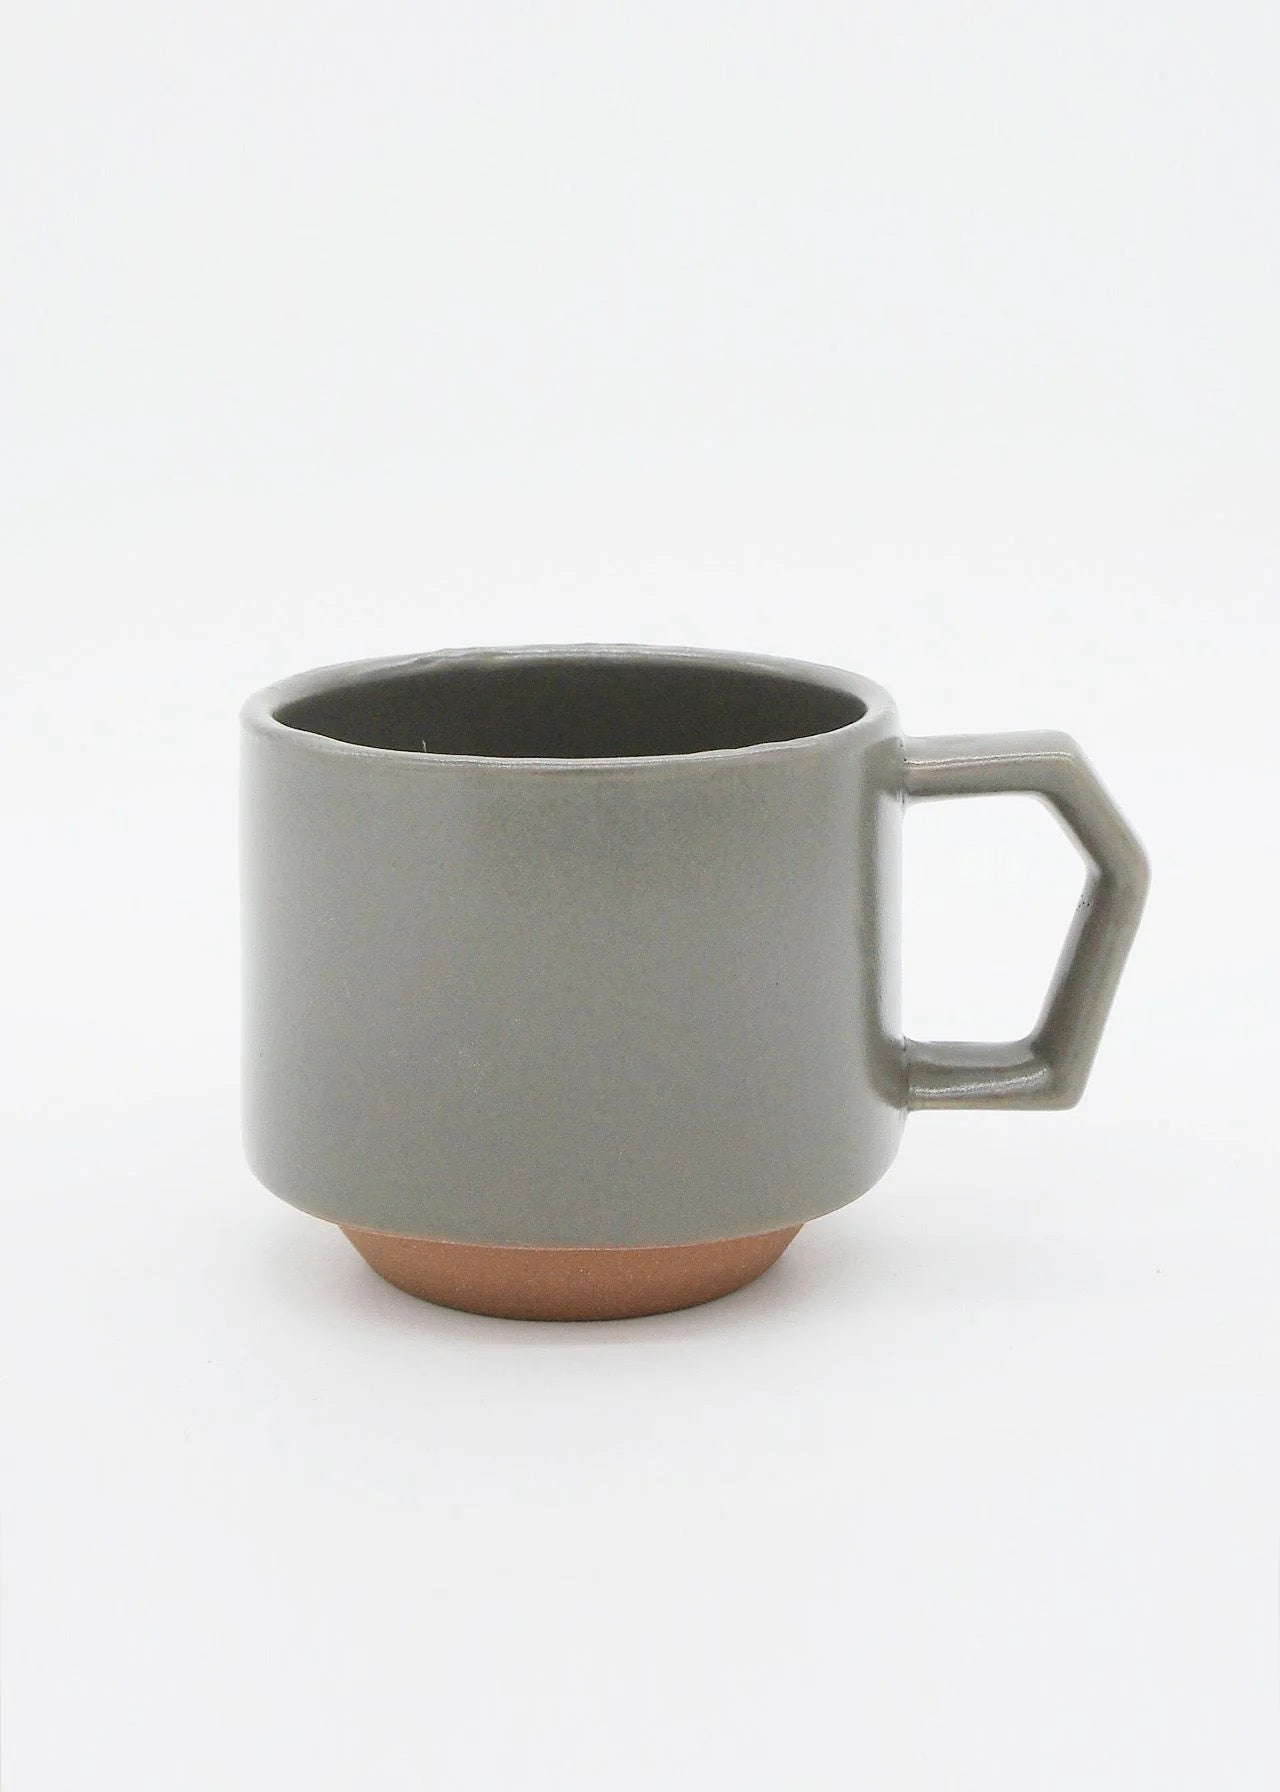 A stacking mug - Grey with a handle on a white background.